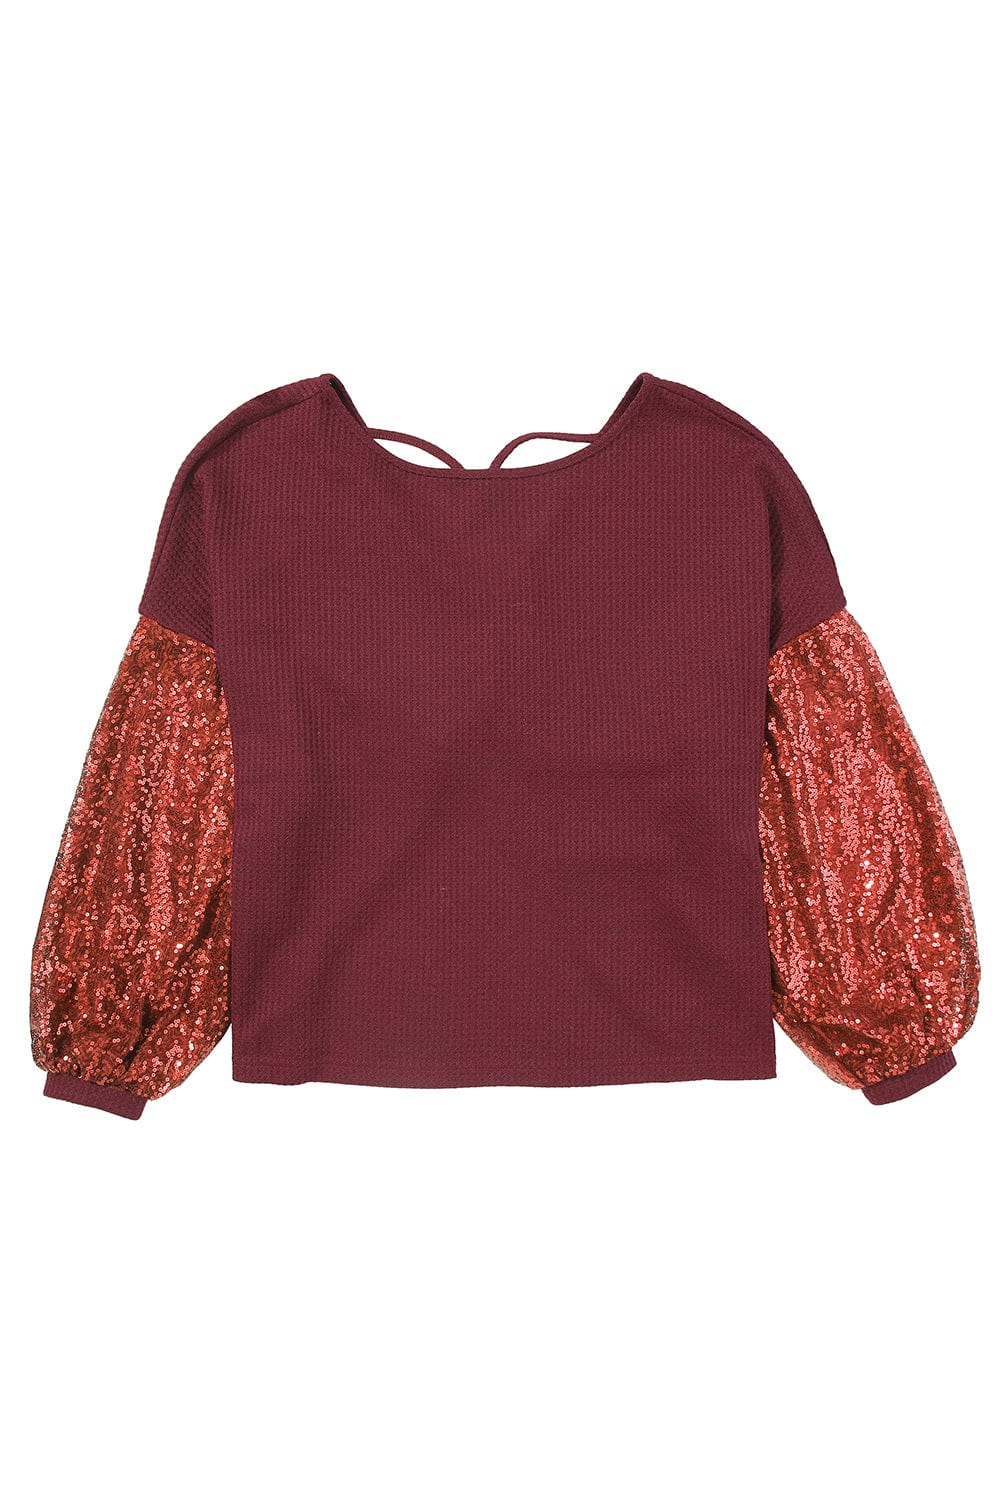 The802Gypsy  Tops Traveling Gypsy Hammer Open Back Waffle Knit Top